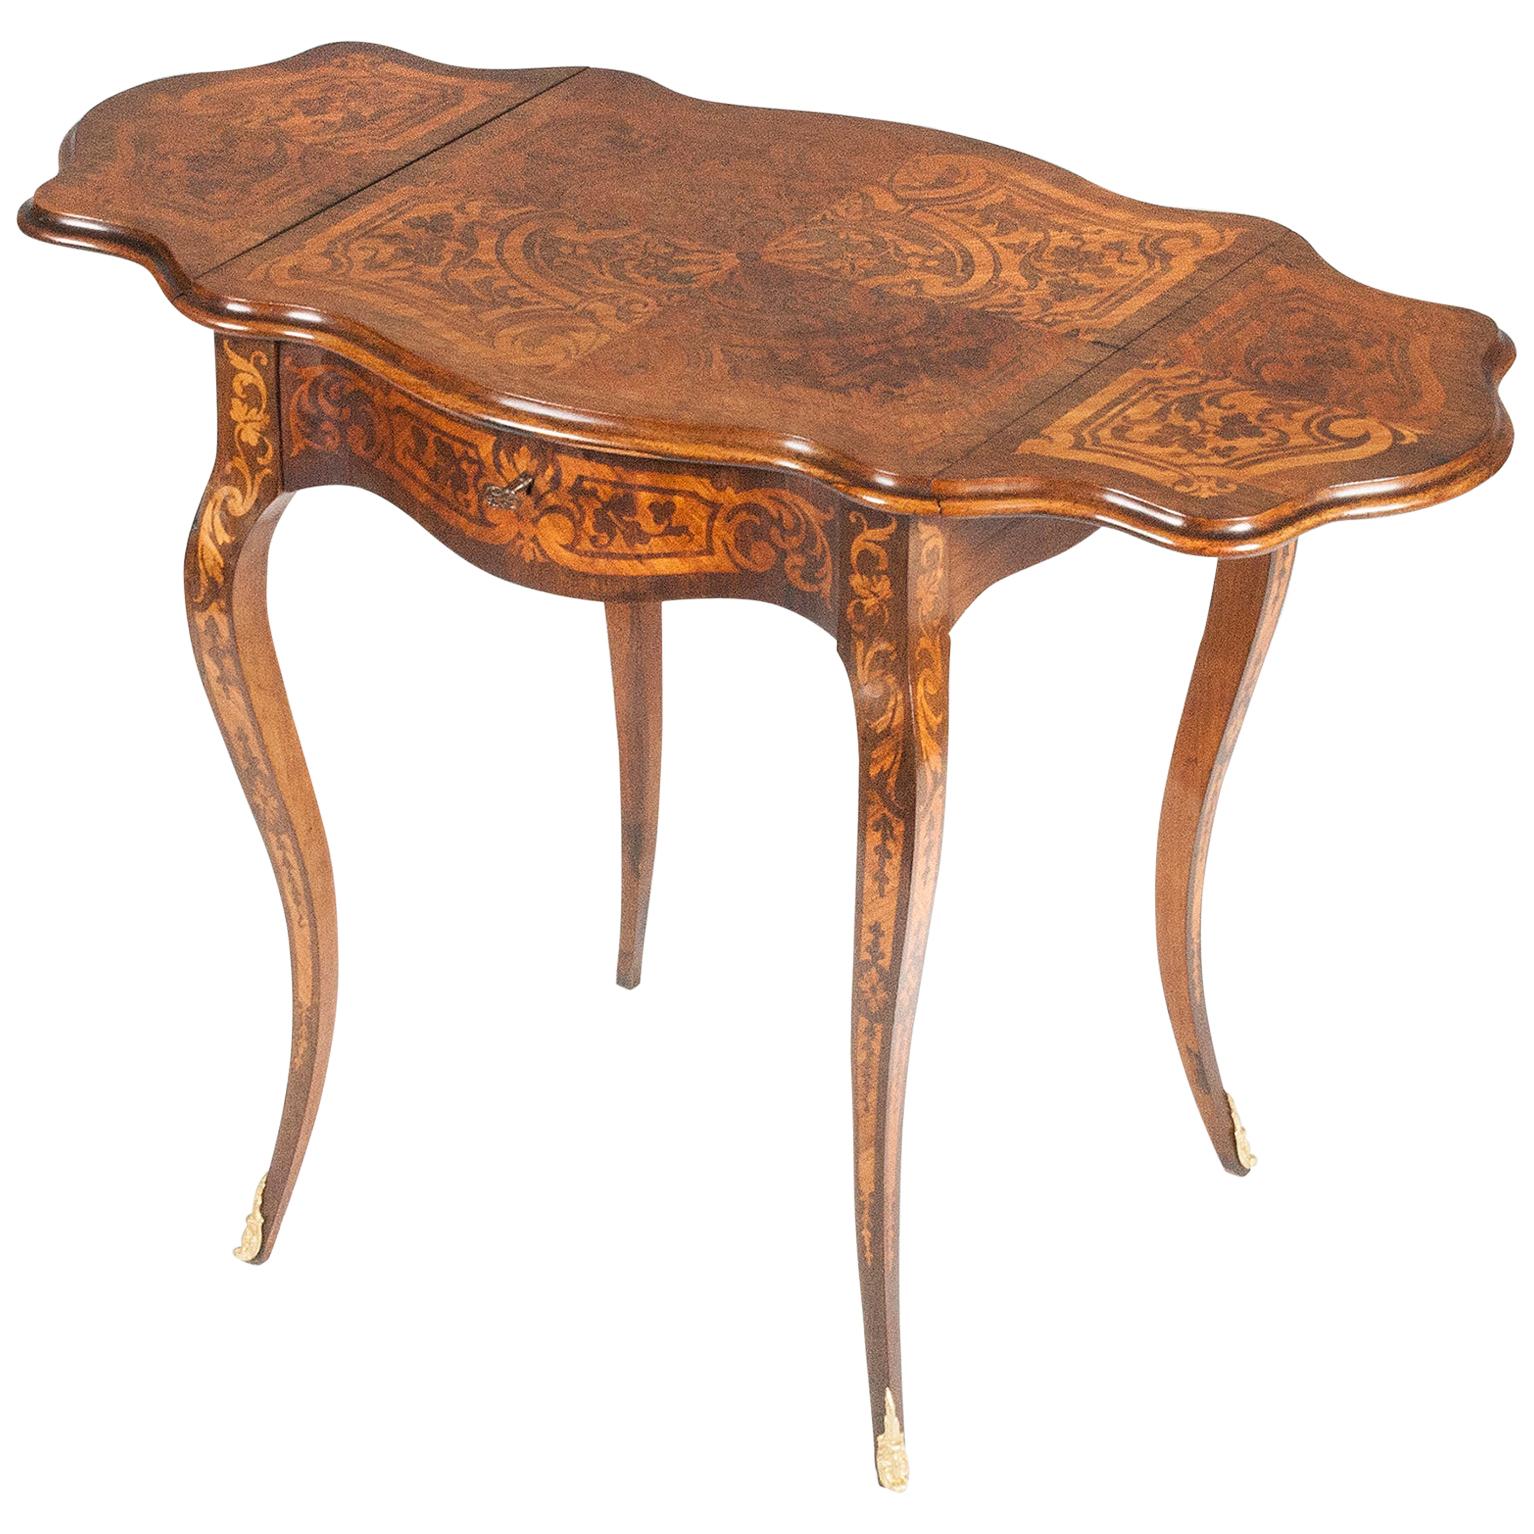 19th Century French Marquetry Drop-Leaf Table